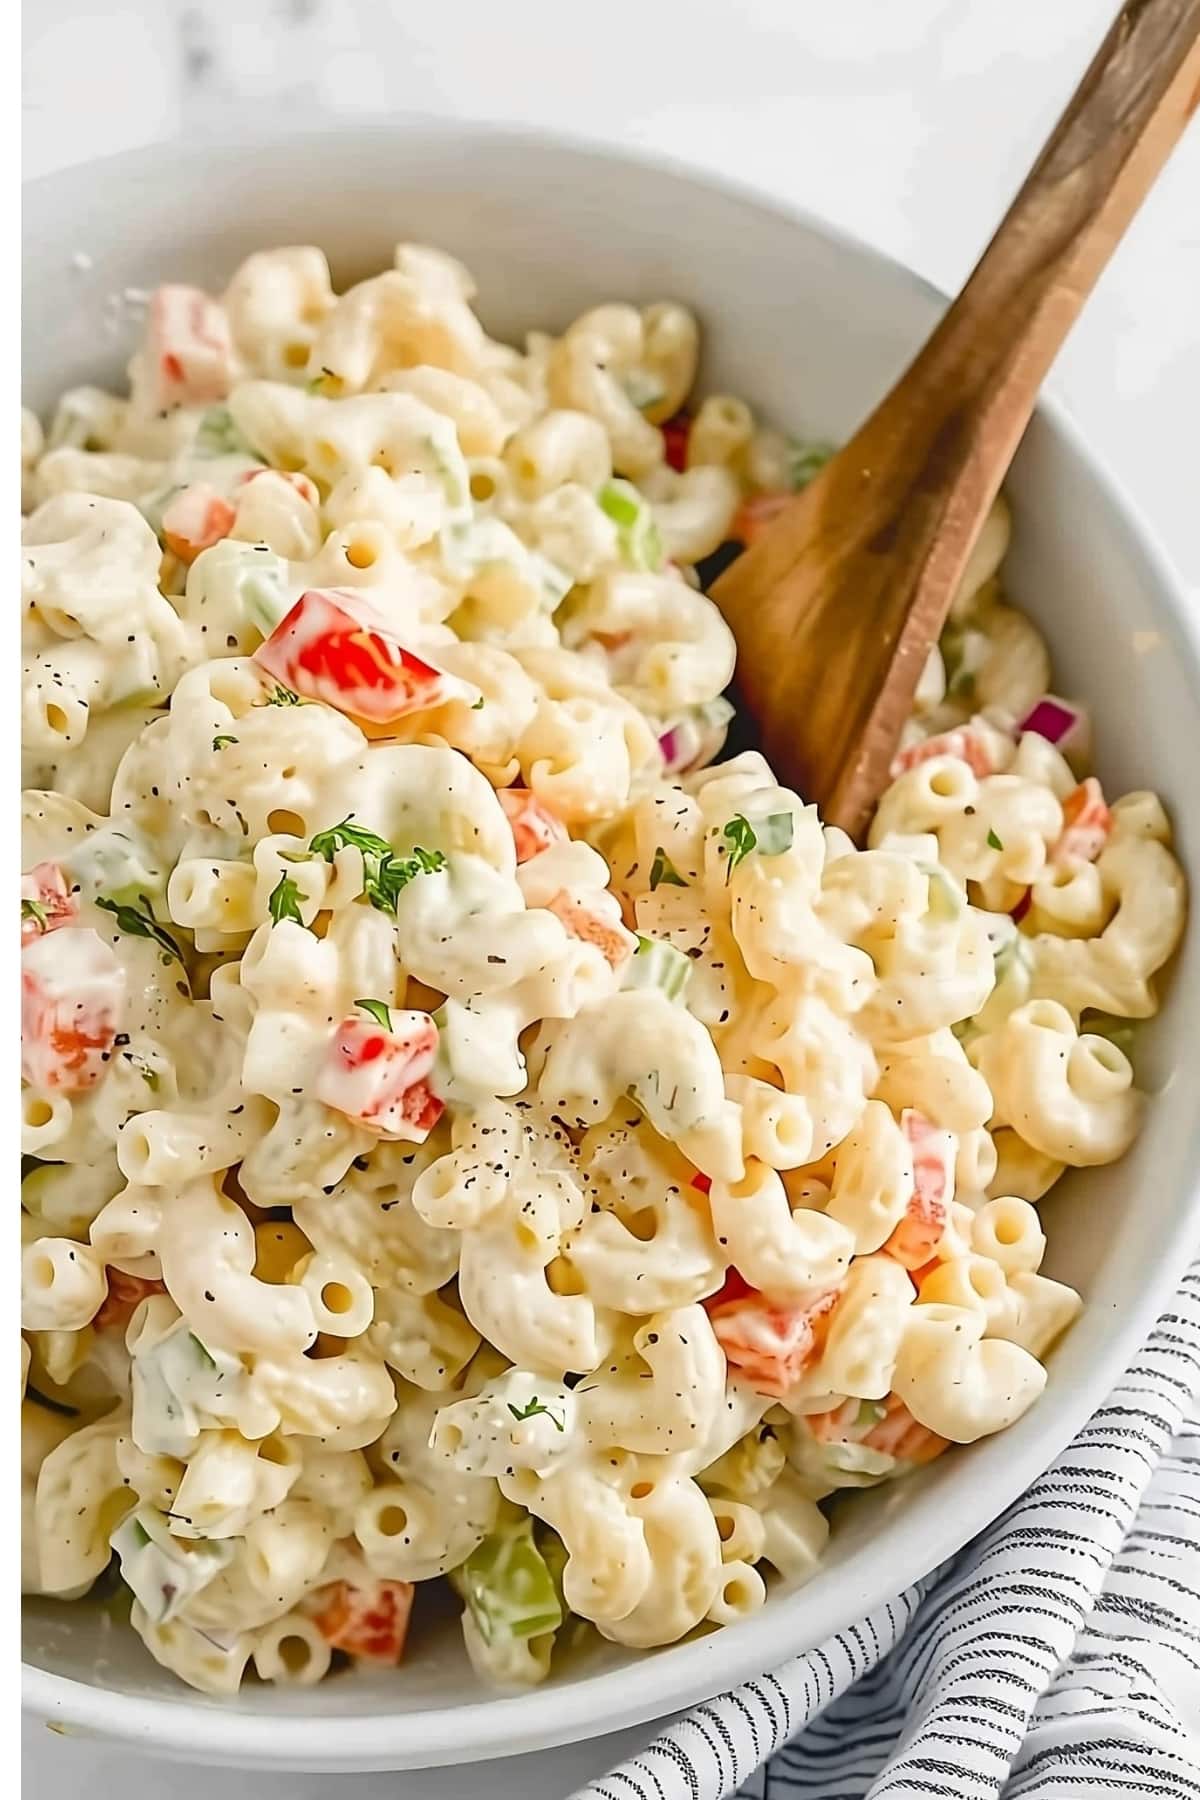 Creamy macaroni salad in a bowl with wooden spoon.